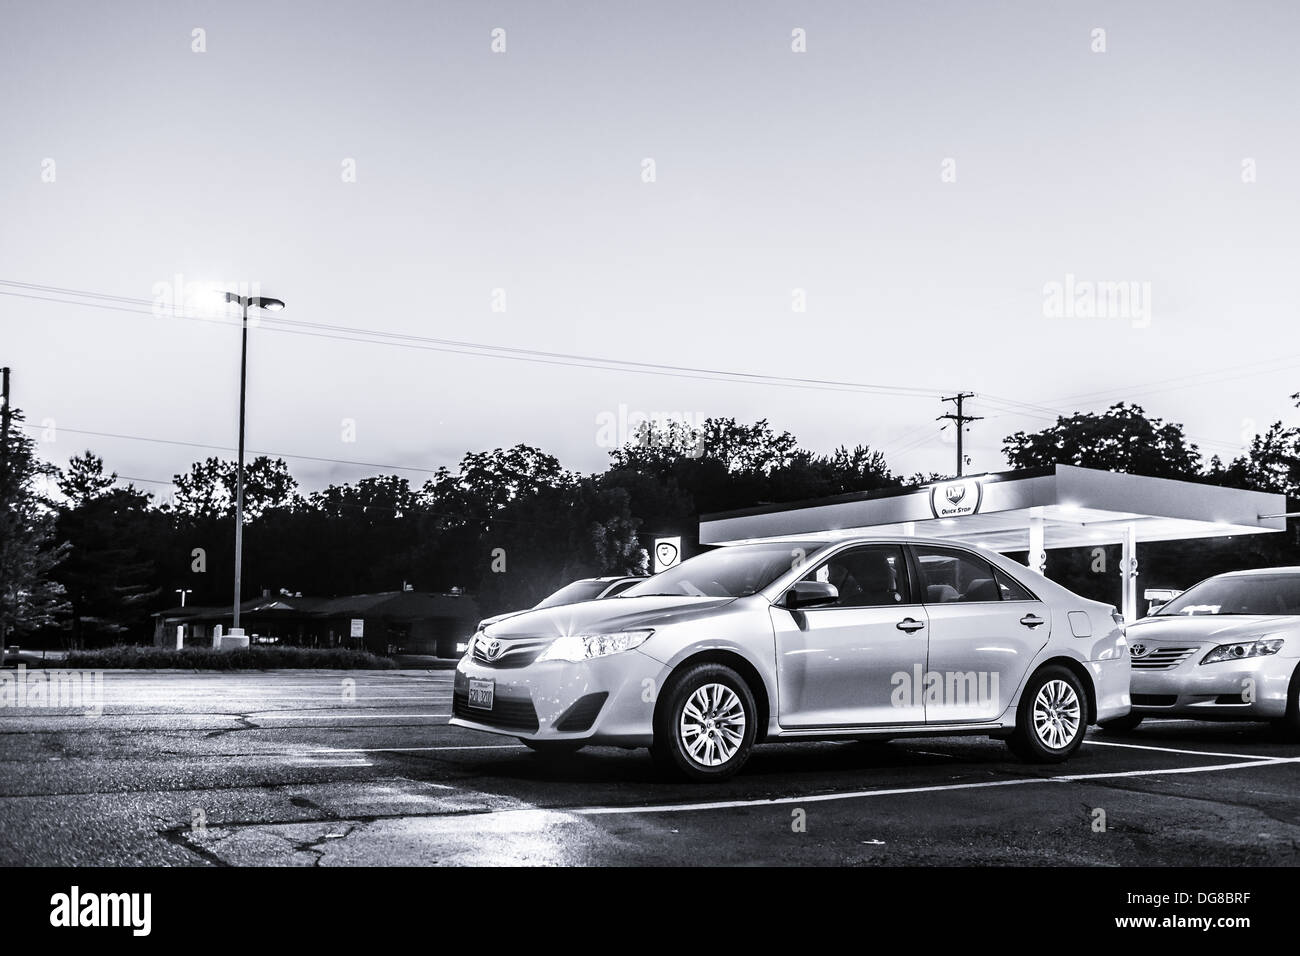 Toyota in parking lot, USA, classy black and white look. Stock Photo